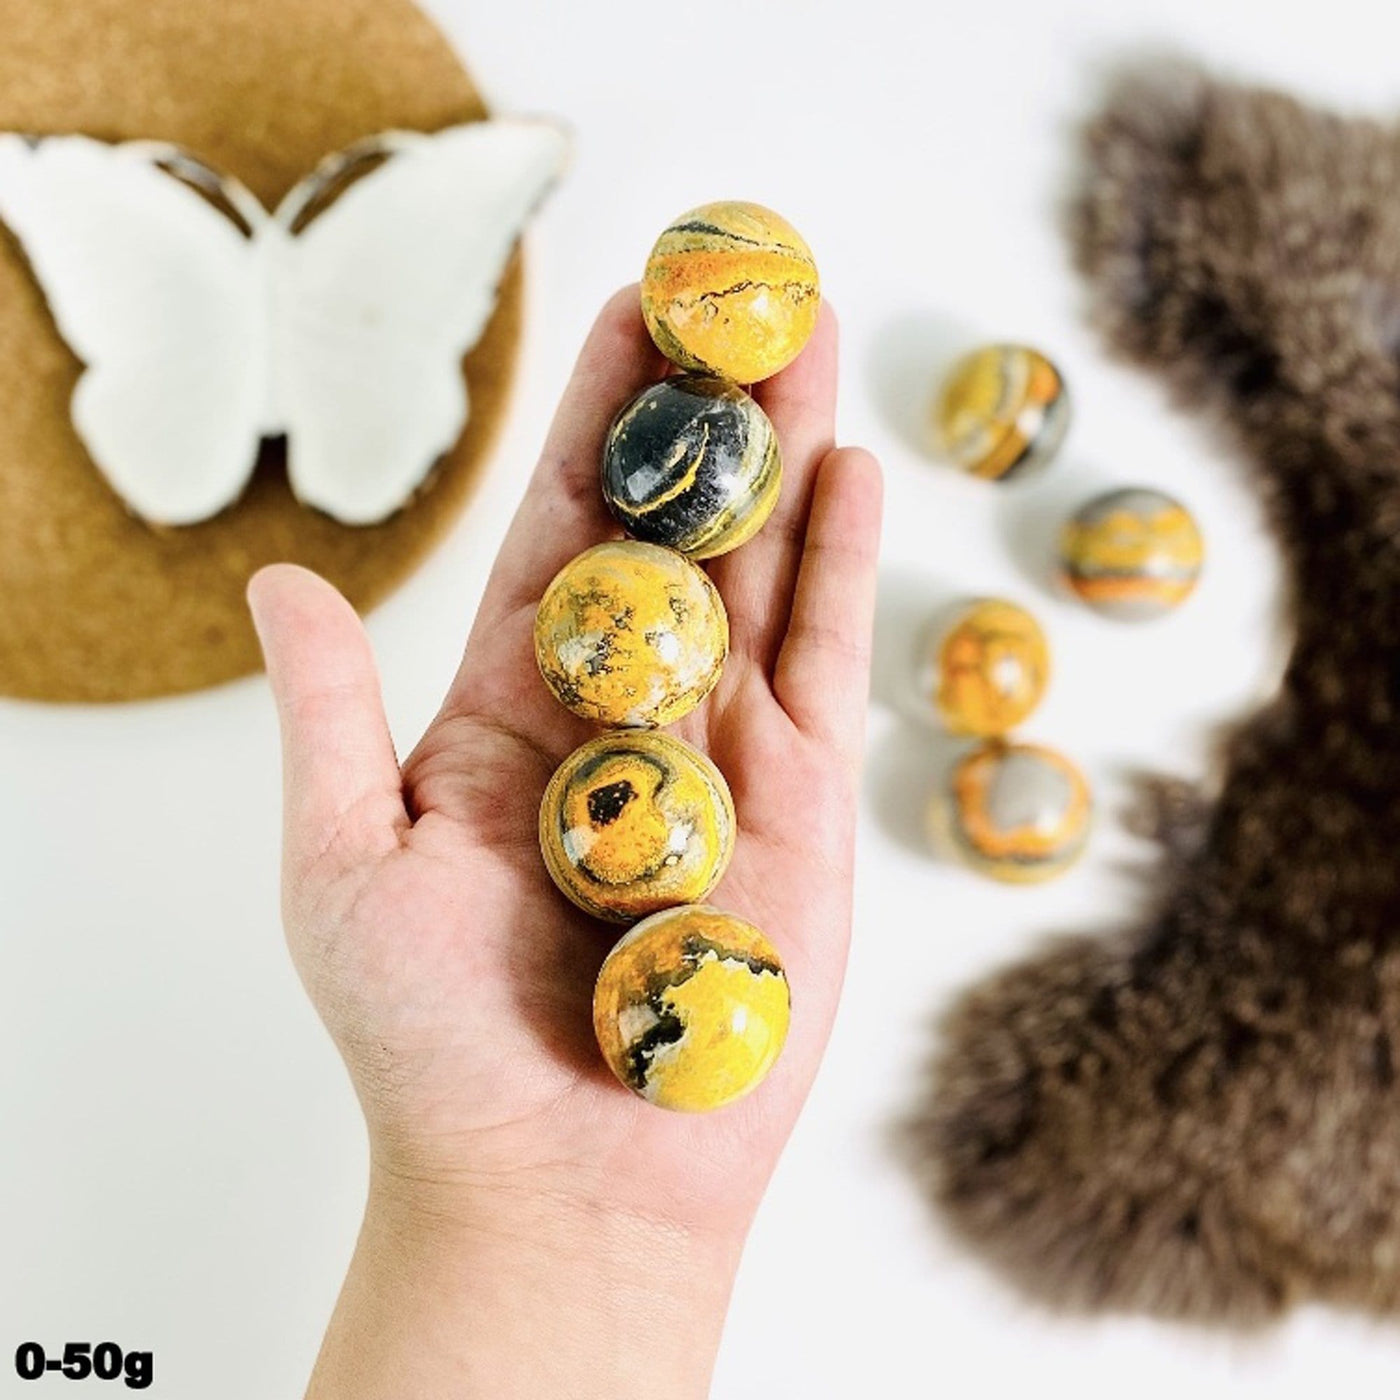 Bumble Bee Jasper Spheres - 5 in a hand